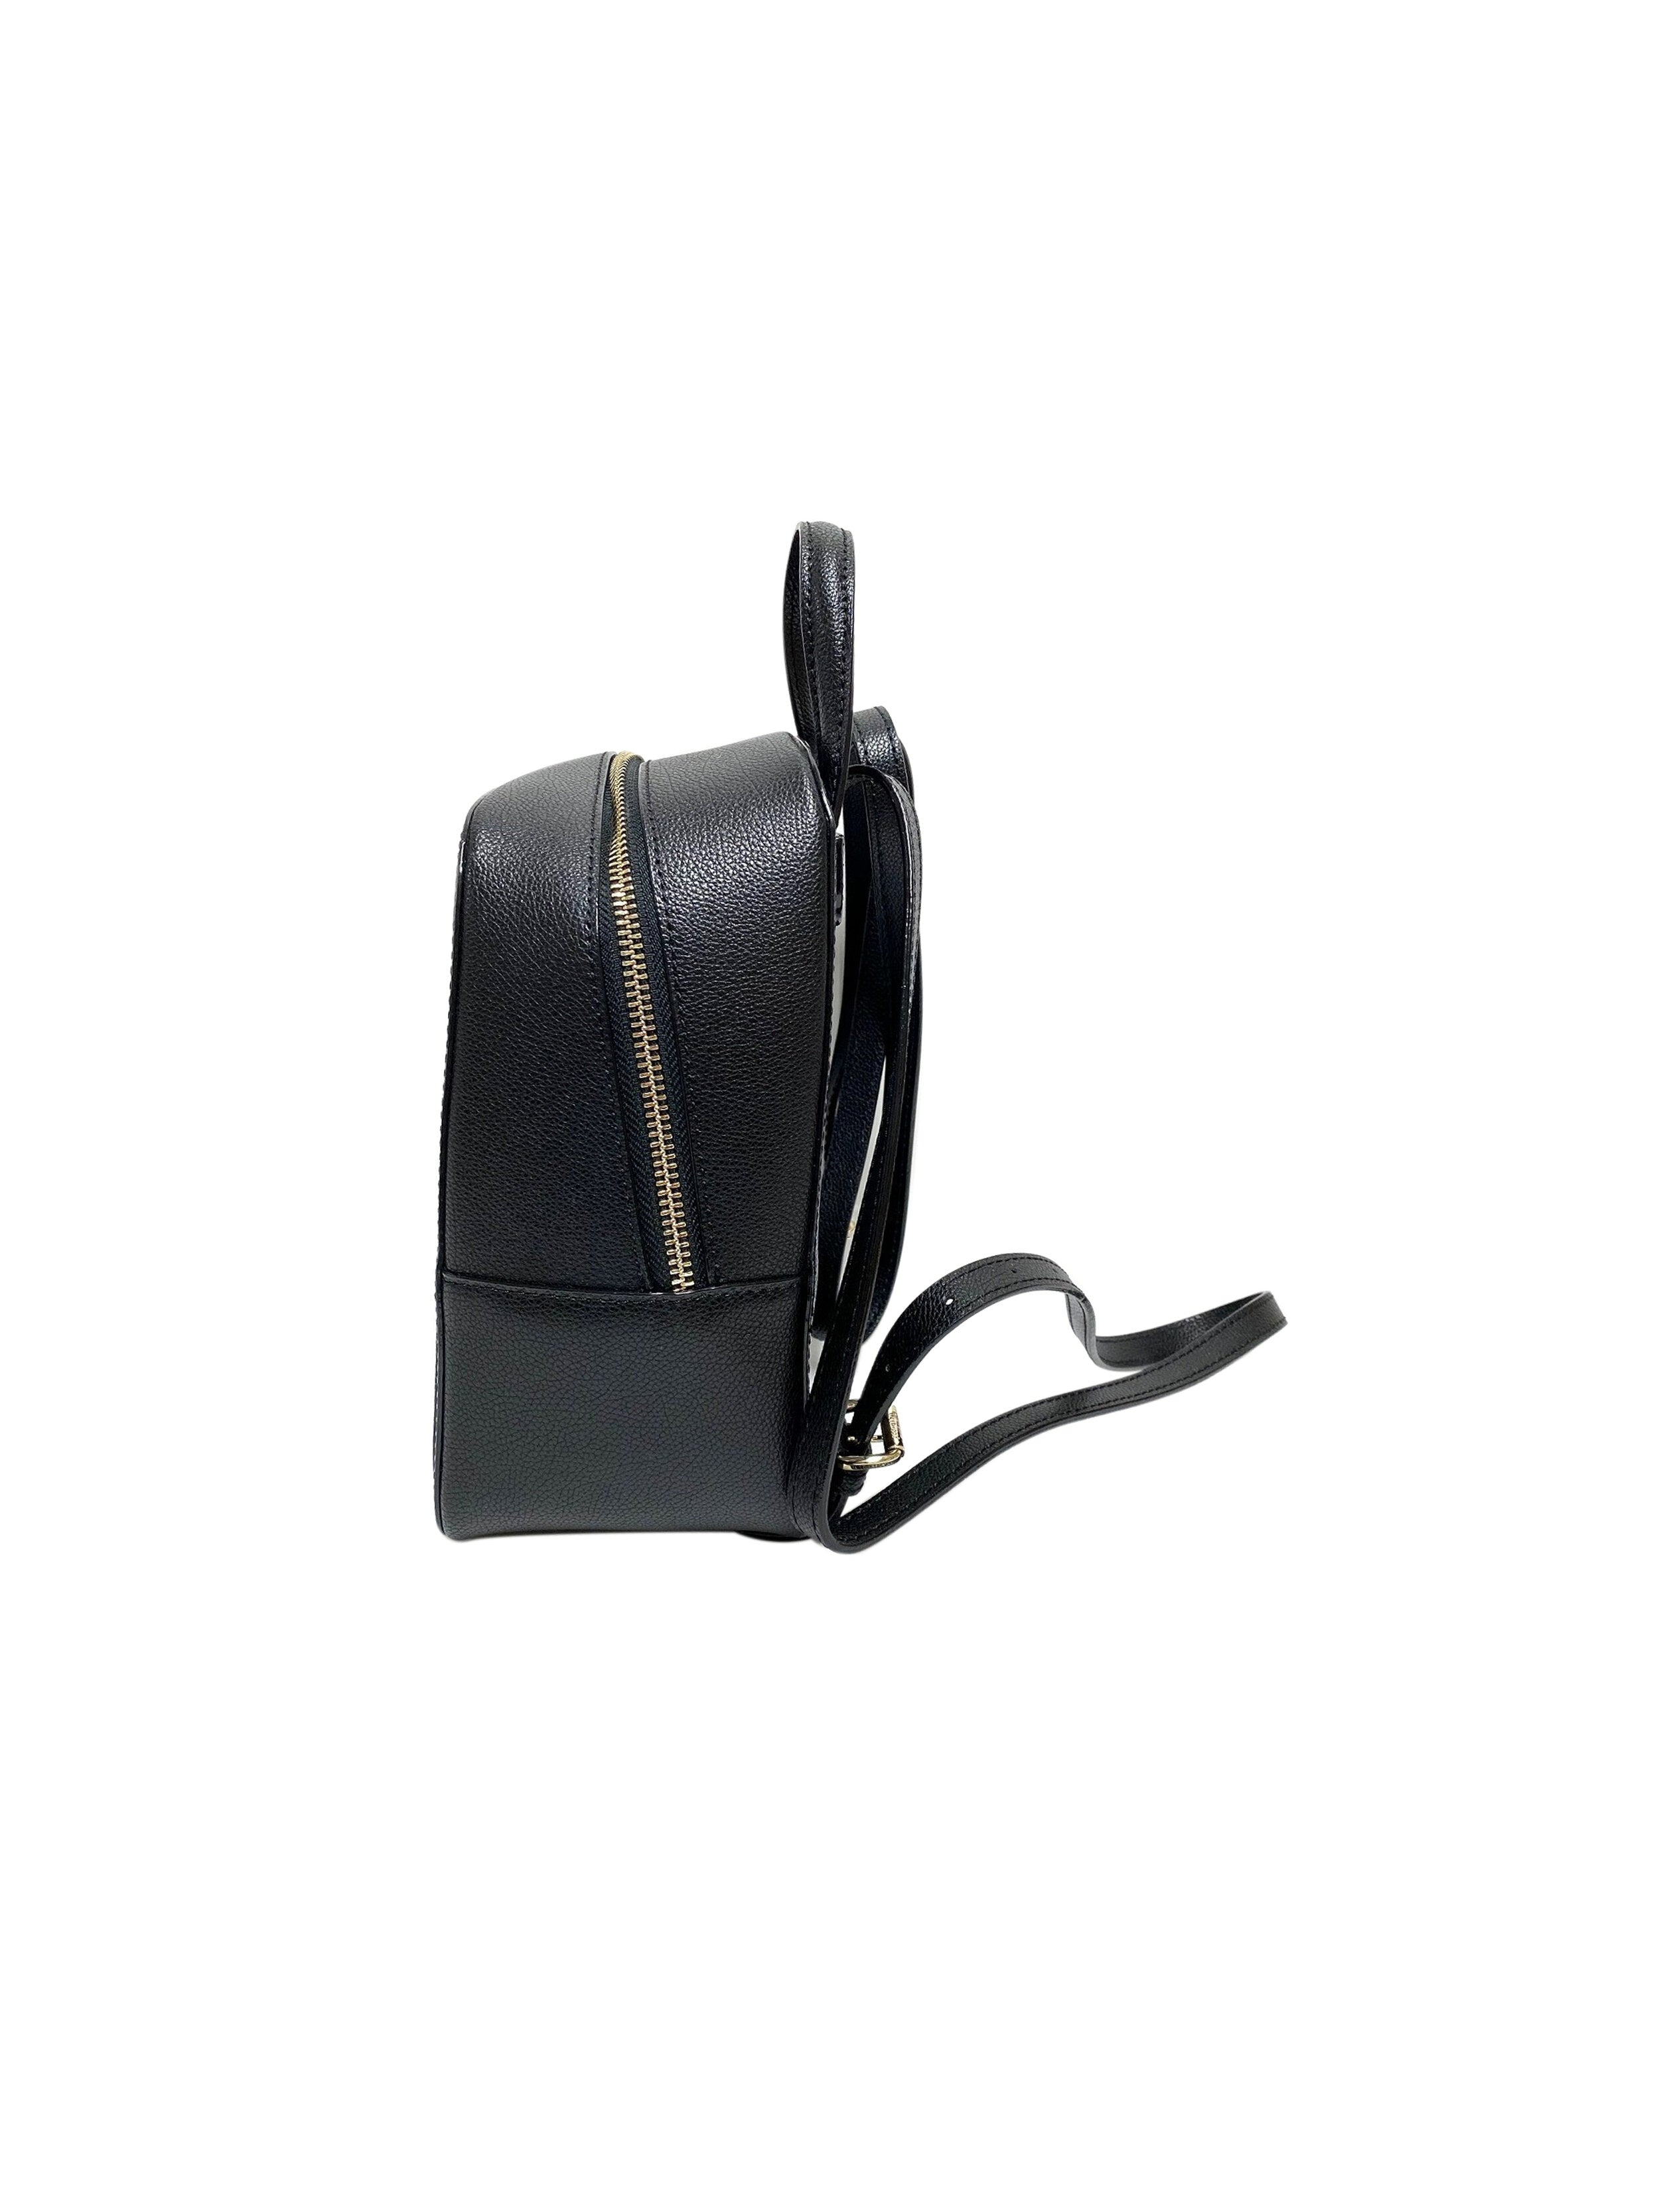 Vivienne Westwood 2000s Black Small Leather Backpack